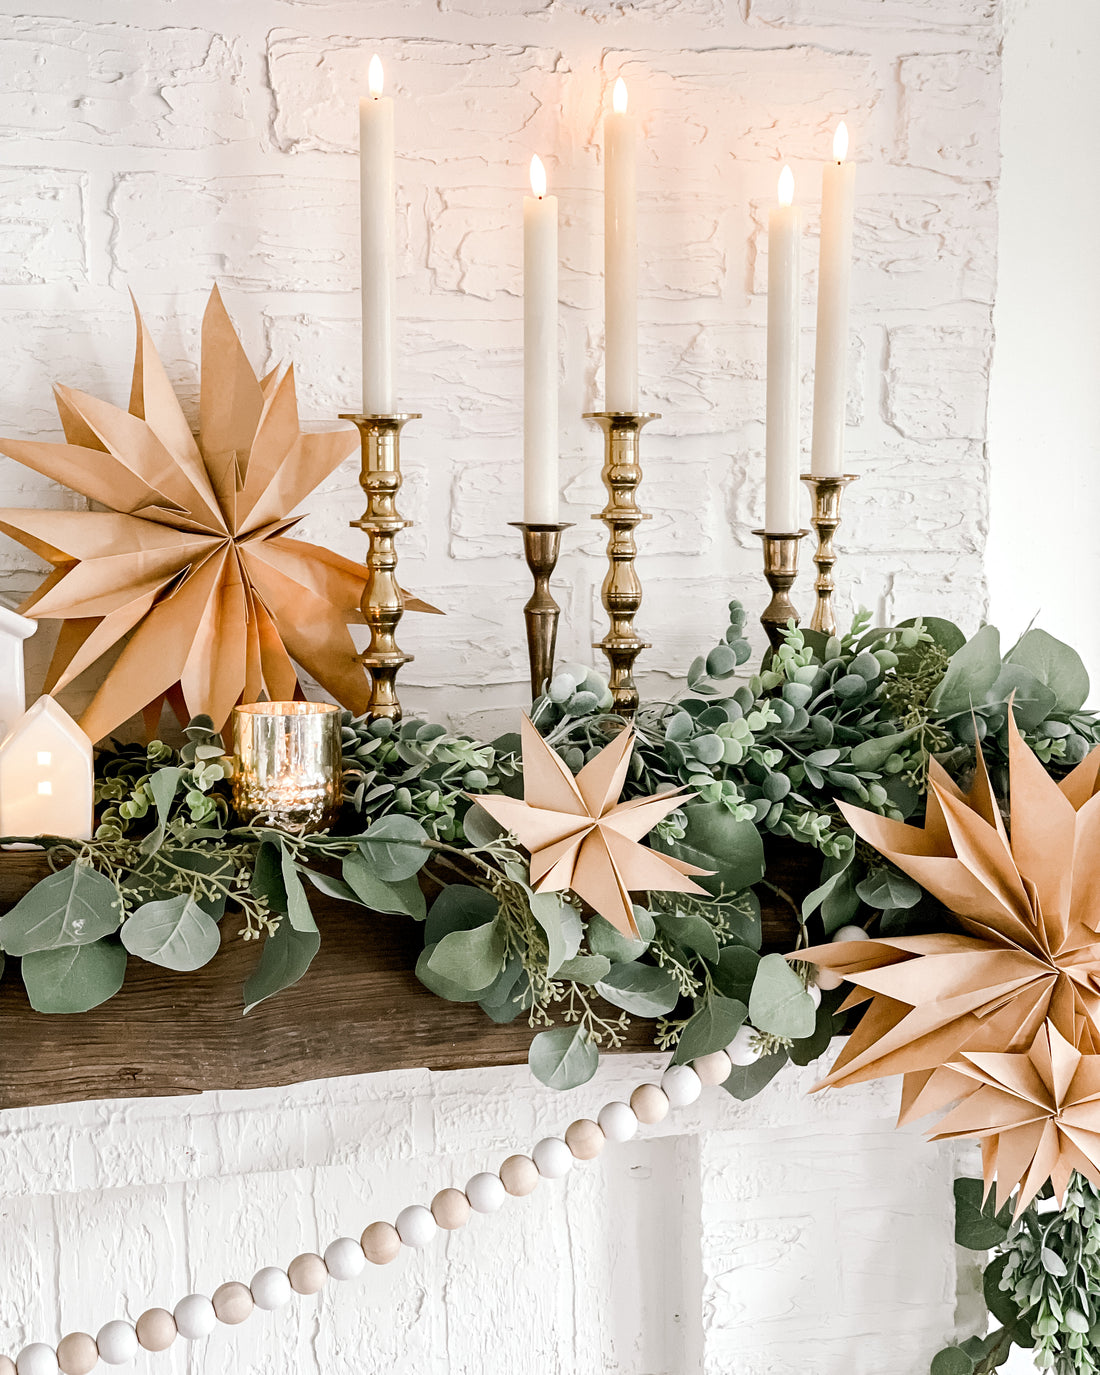 Transitioning Christmas Decor to Winter with Paper Bag Snowflakes